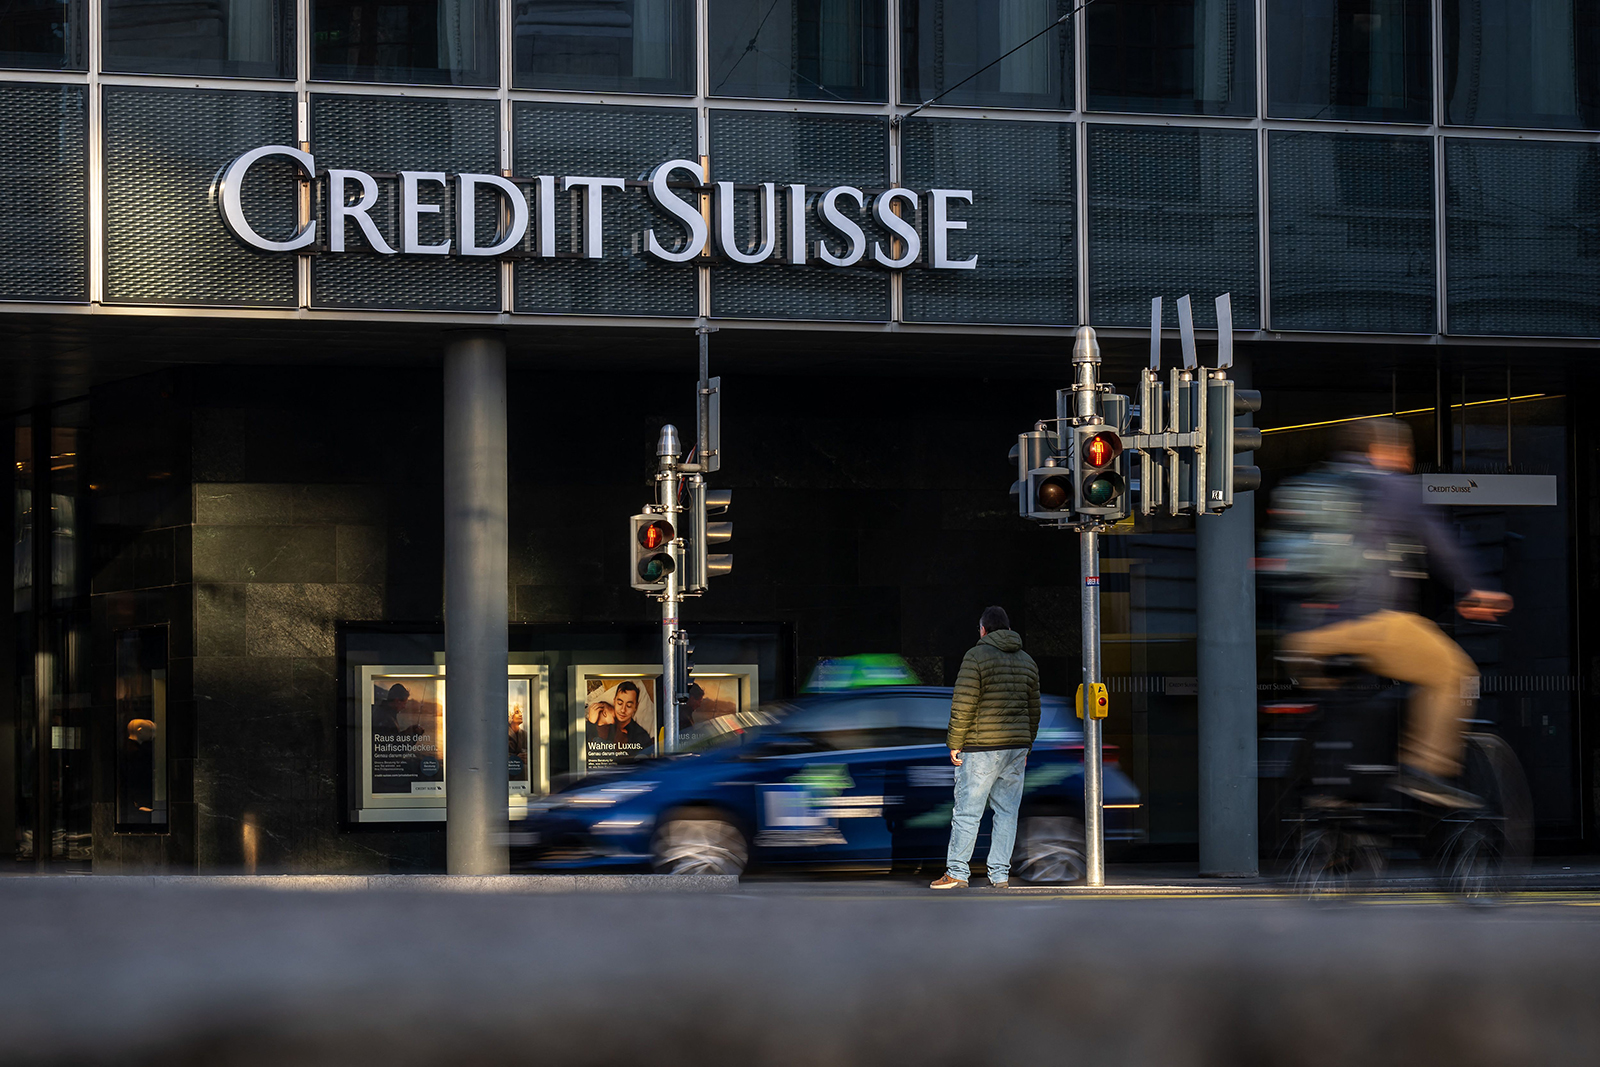 A Credit Suisse branch in Basel, Switzerland, on October 25, 2022.